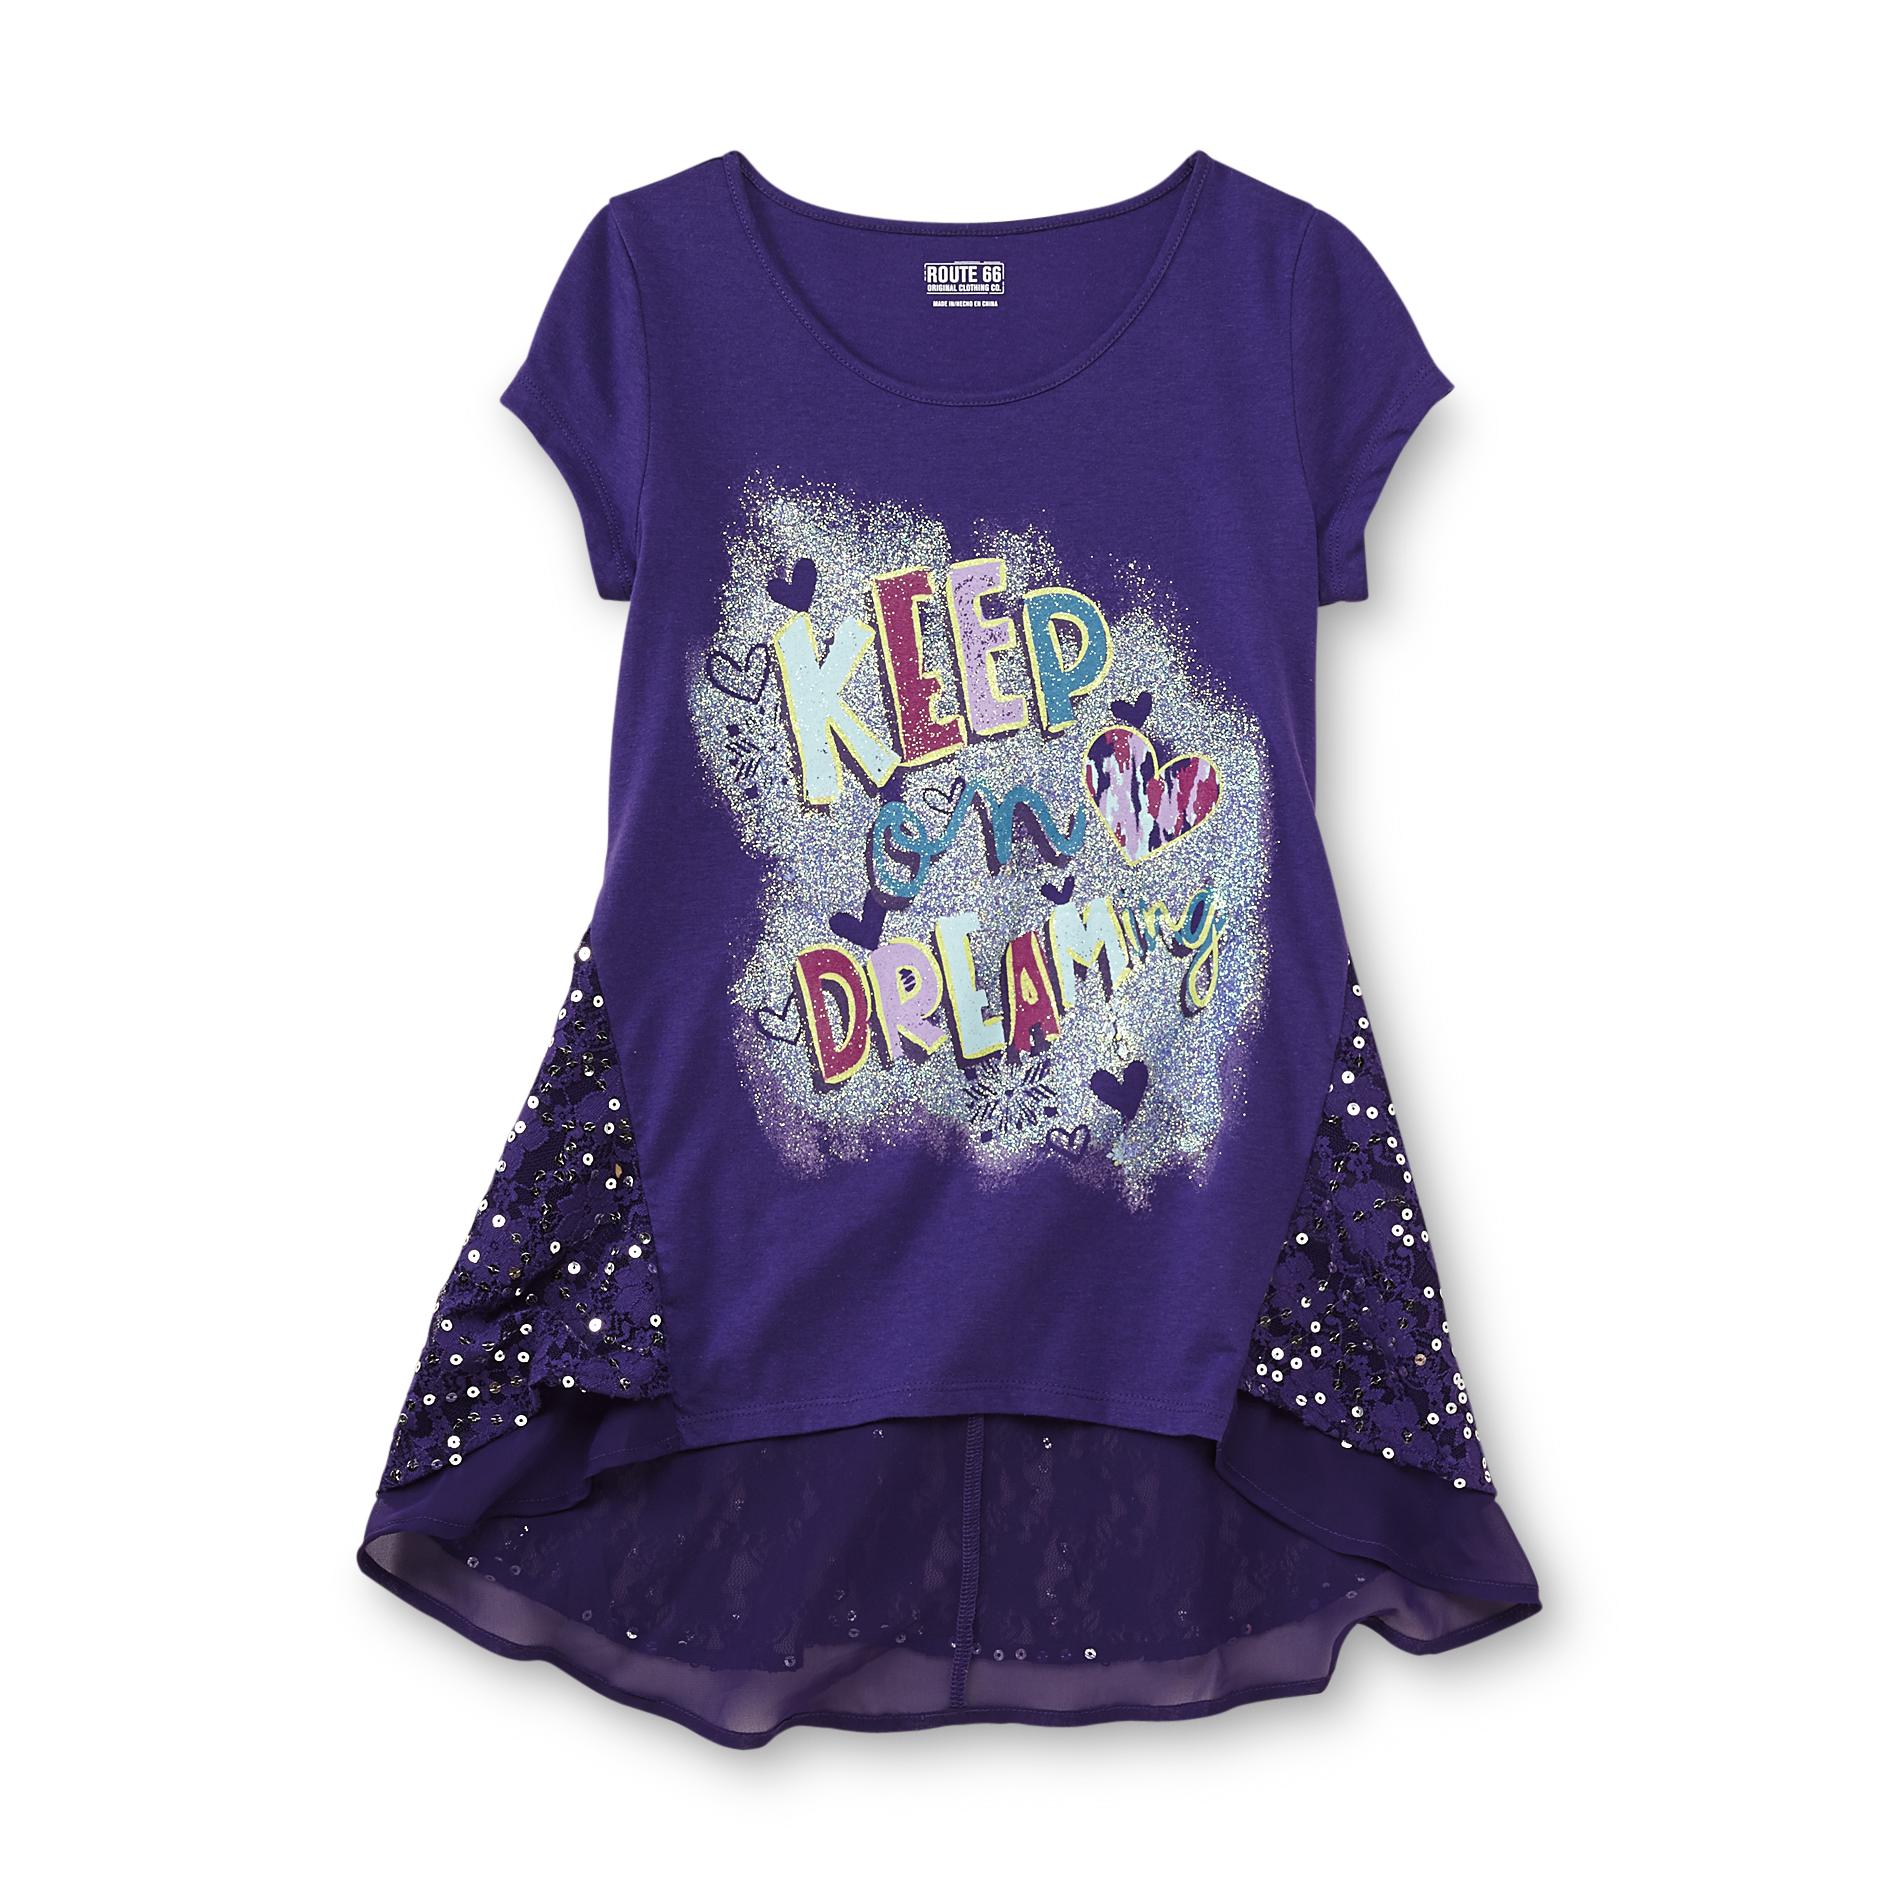 Route 66 Girl's Embellished Graphic T-Shirt - Keep On Dreaming